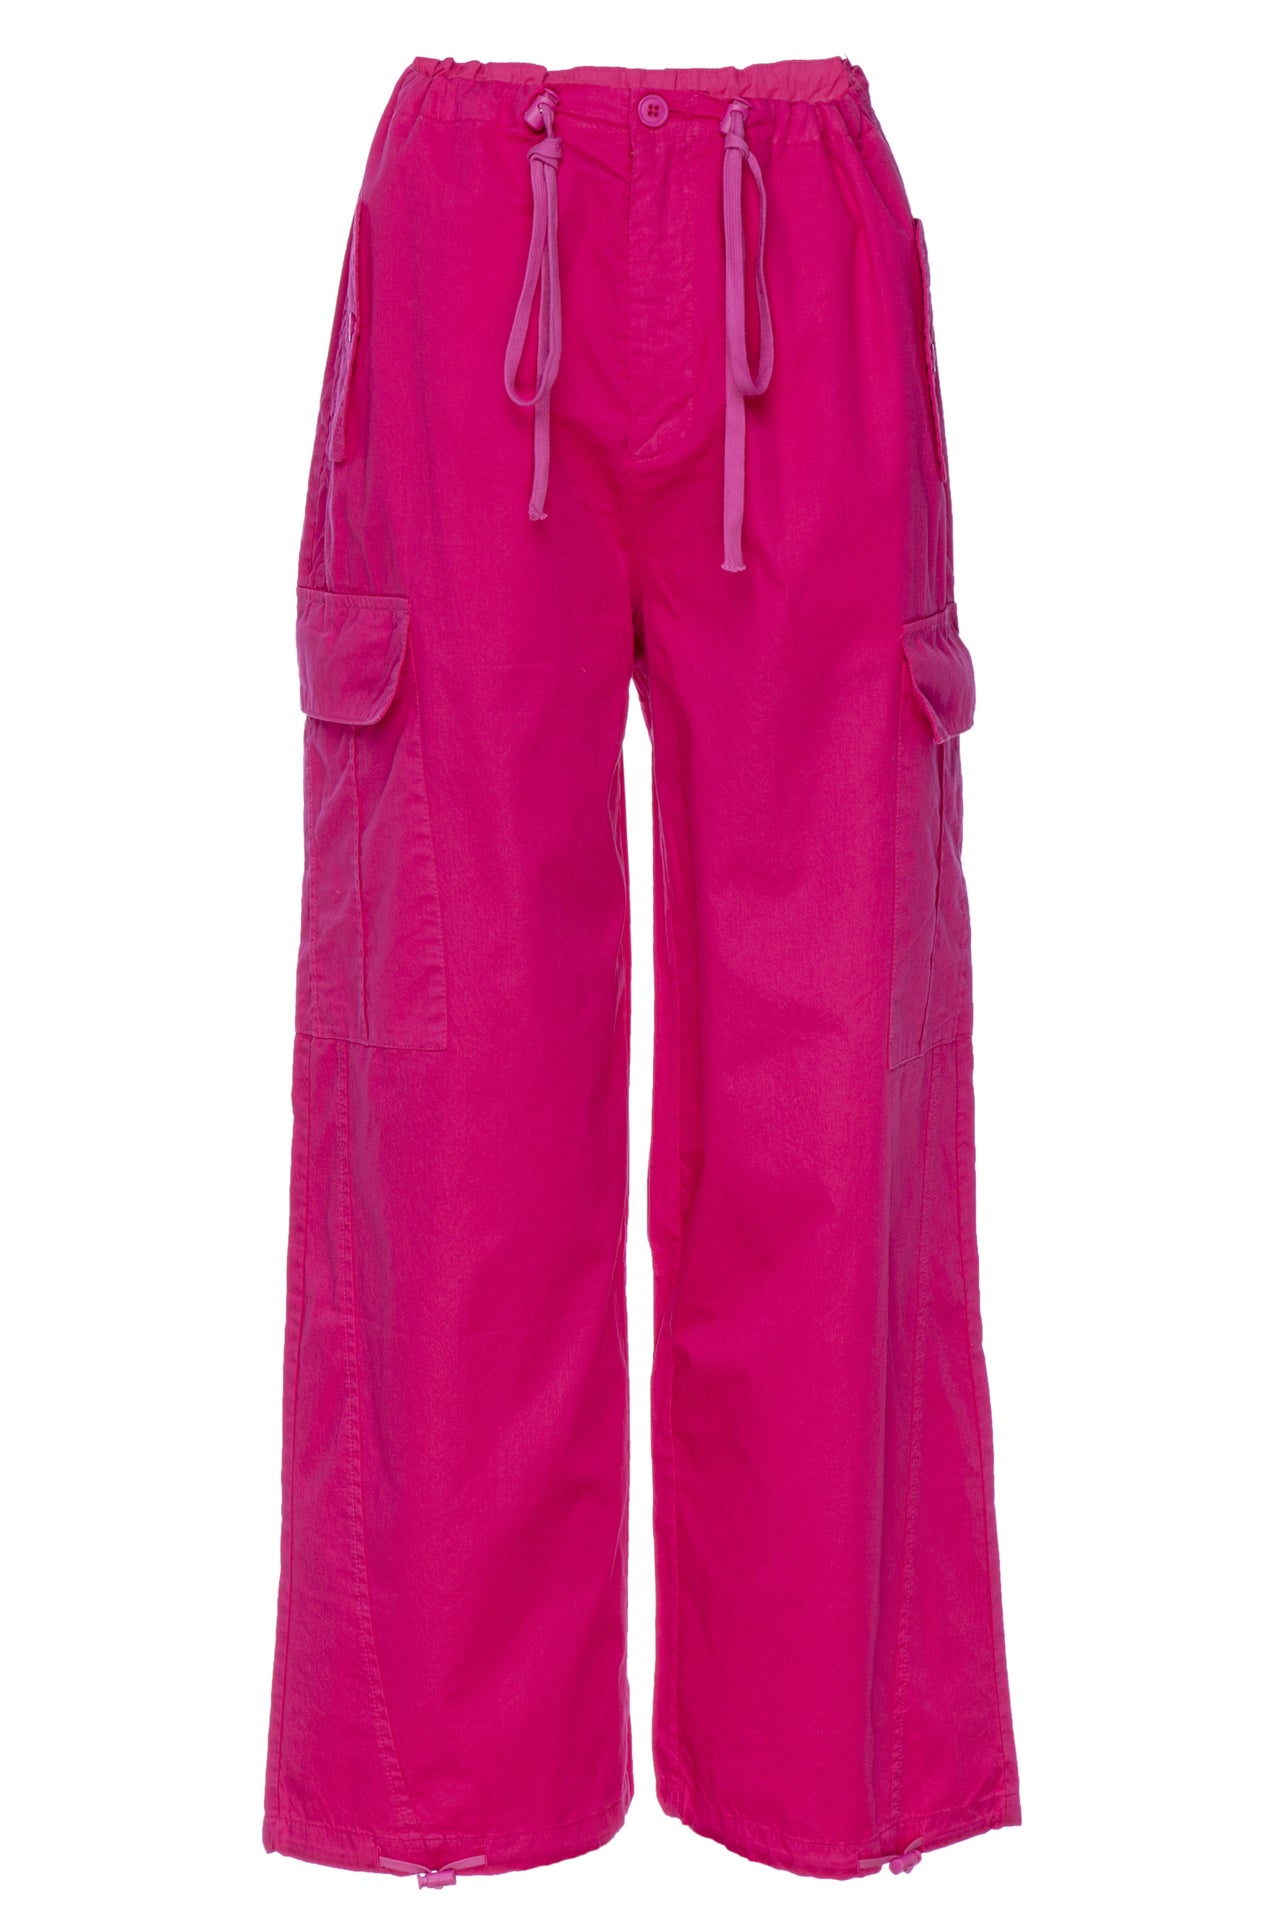 Styling Pink Parachute Pants from Target